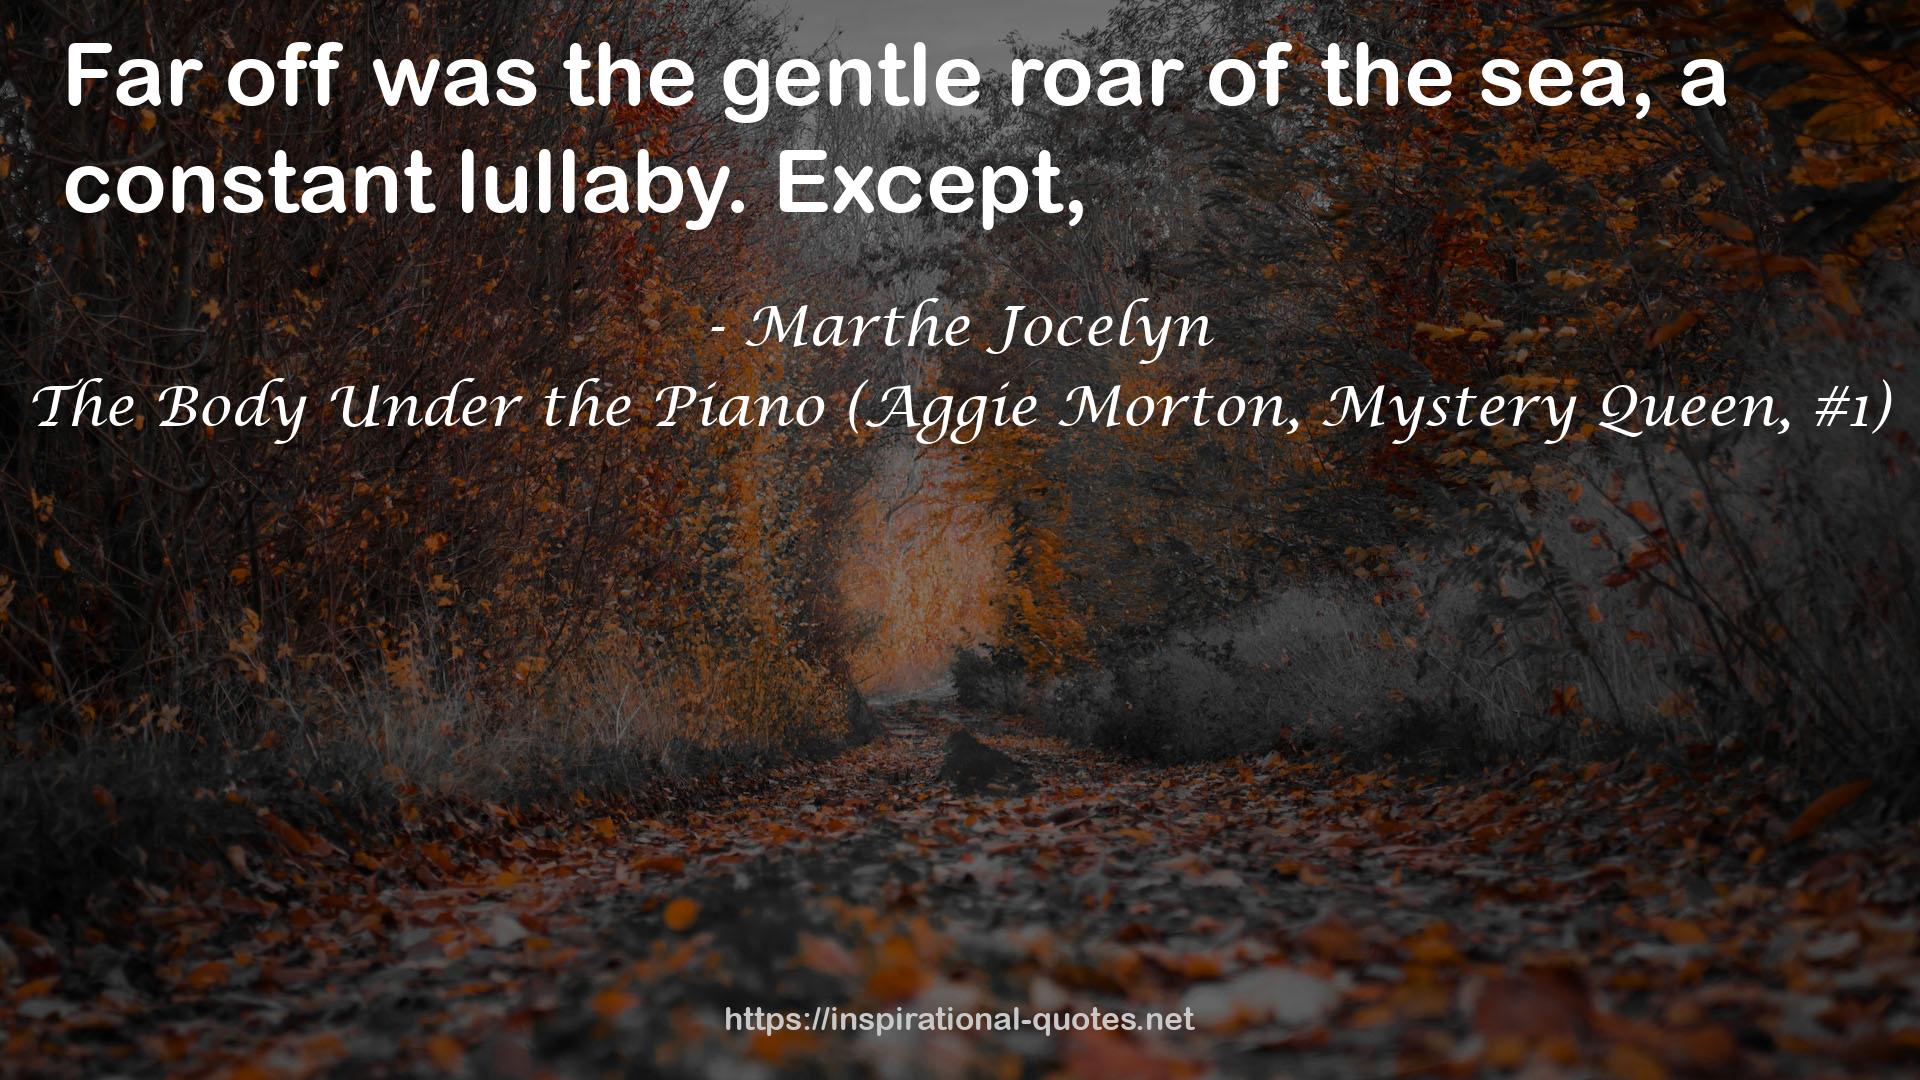 The Body Under the Piano (Aggie Morton, Mystery Queen, #1) QUOTES